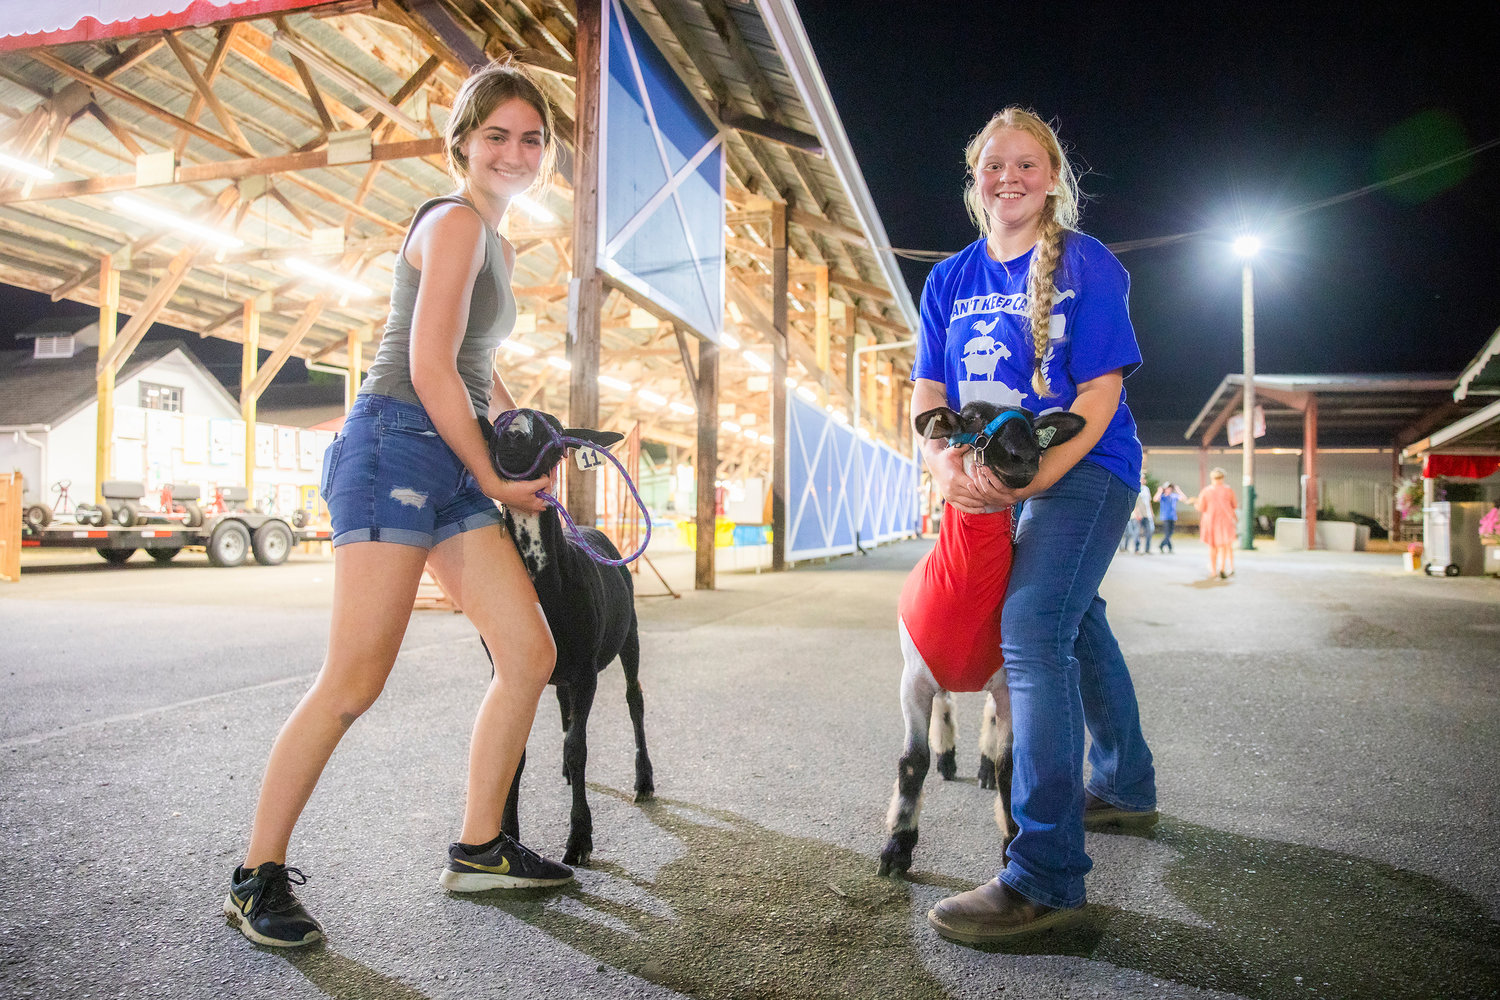 Haley Gallagher, 15, and Deseree Abrams, 15, smile and hold their sheep Juan and Shadow at the Southwest Washington Fairgrounds Tuesday night in Centralia.